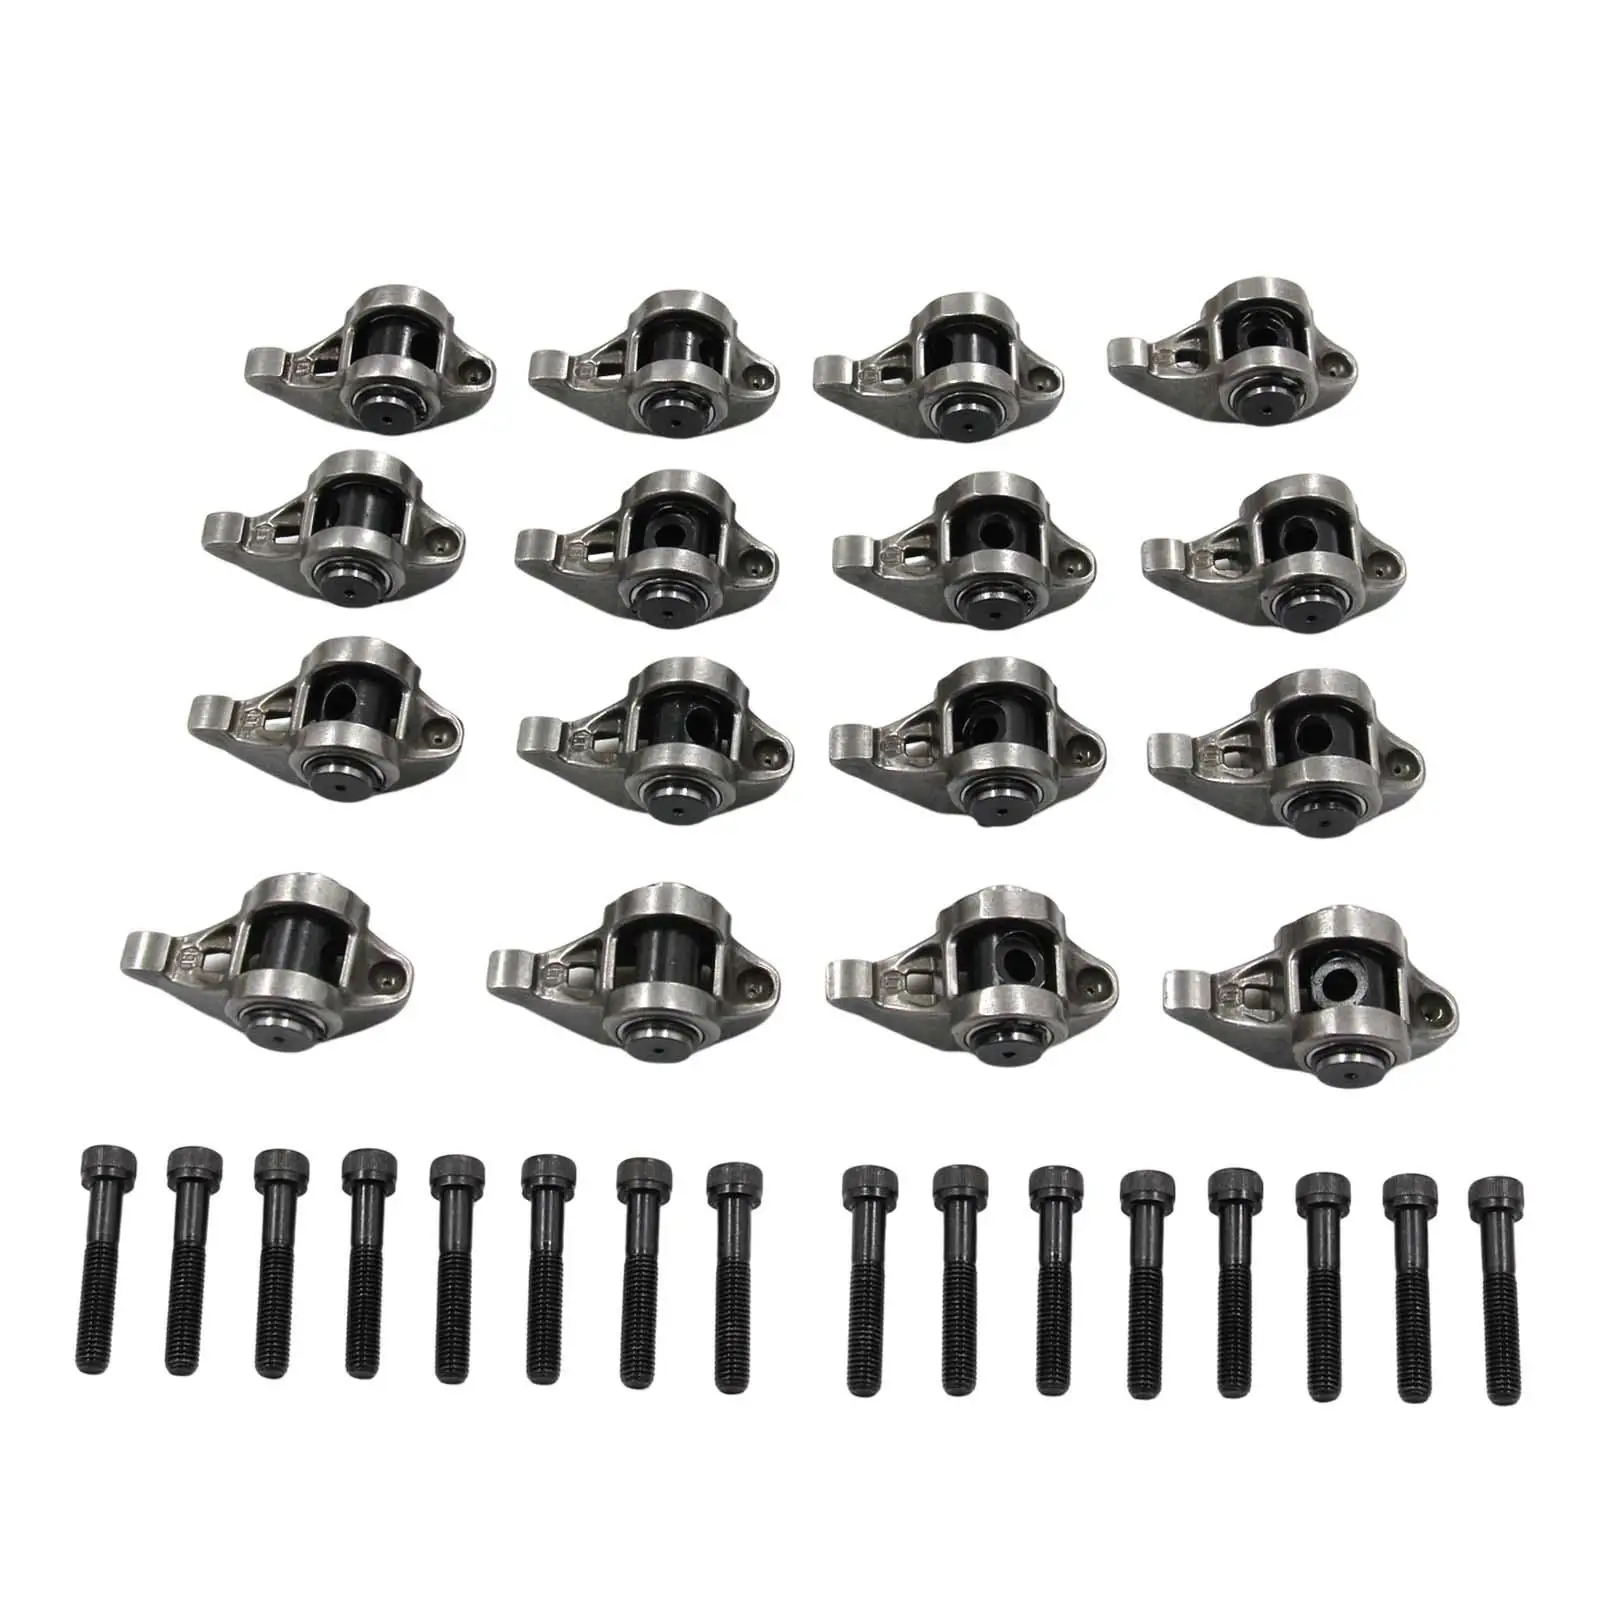 16 Pieces Rocker Arms and Bolts Kit 10214664 for Chevrolet LS1 LS2 LS6 LM7 LM4 Lq4 Lq9 LY5 LY6 4.8 5.3 5.7 6.0L